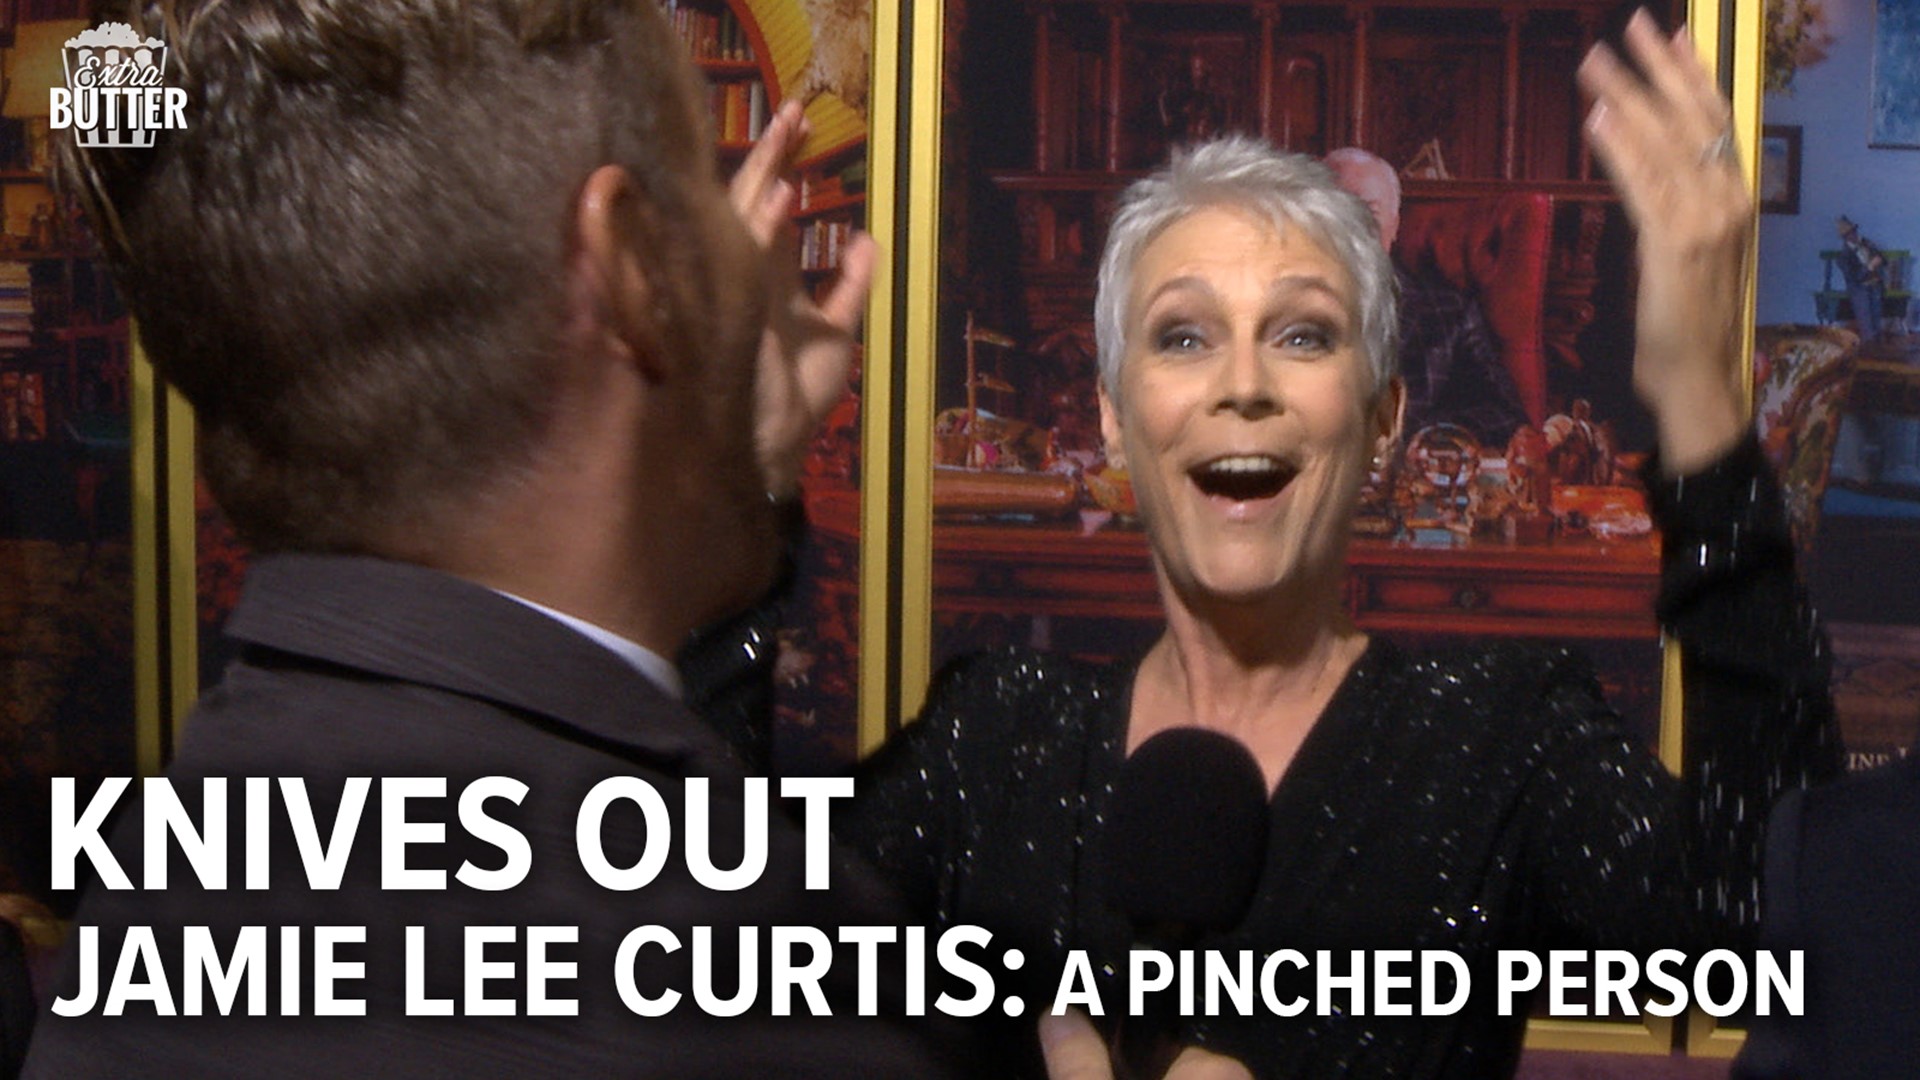 Jamie Lee Curtis says she is lucky to work with the other actors in 'Knives Out' and for her life in general.